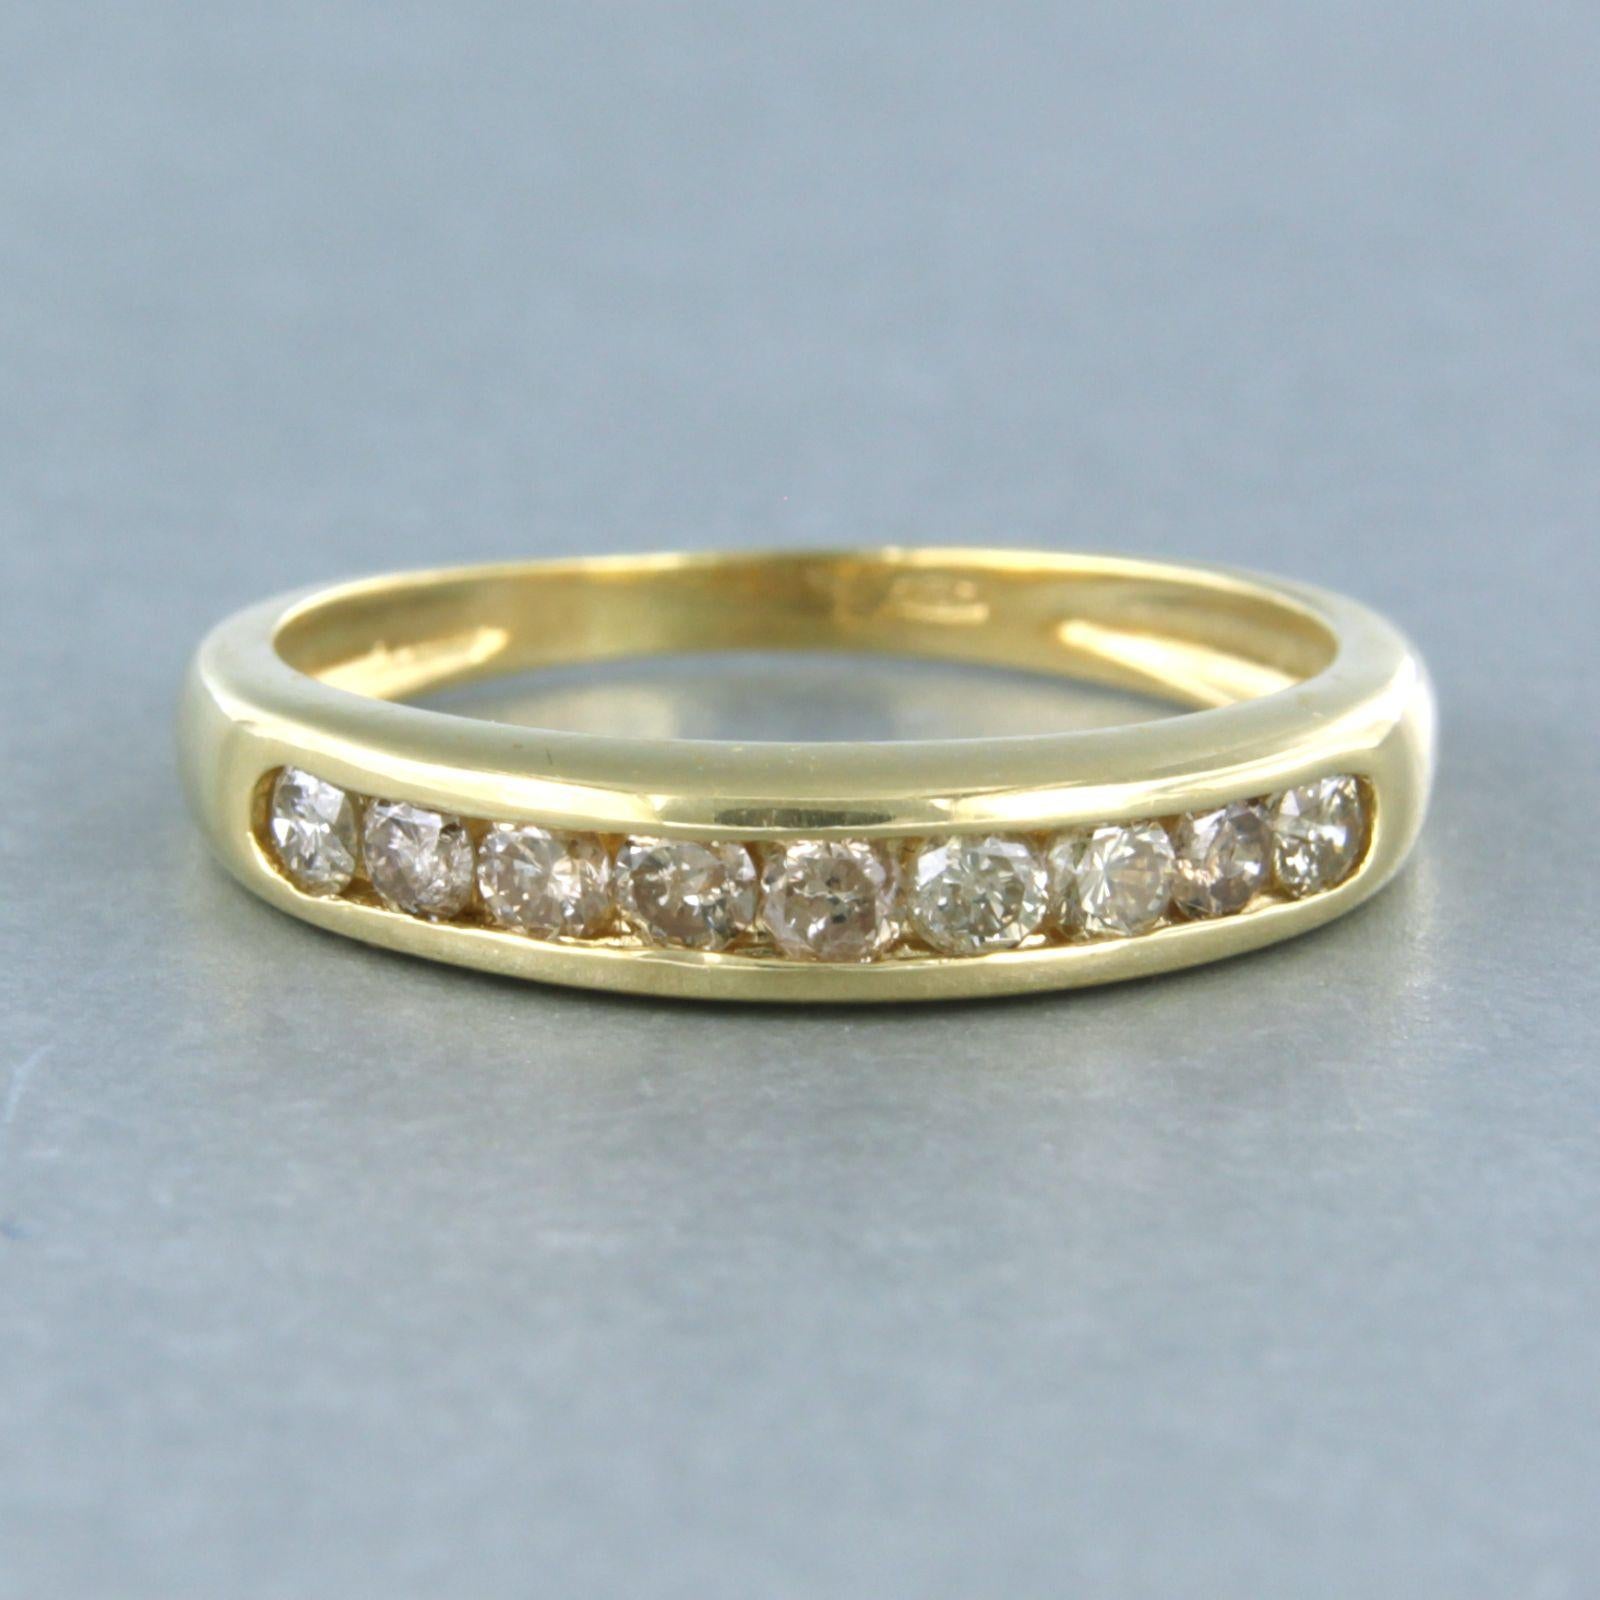 18k yellow gold ring set with brilliant cut diamonds. 0.54ct - M/N - SI - ring size U.S. 7.75 - EU 18 (56)

detailed description:

the top of the ring is 4.0 mm wide

Ring size US 7.75 - EU 18 (56), the ring can be enlarged or reduced a few sizes at